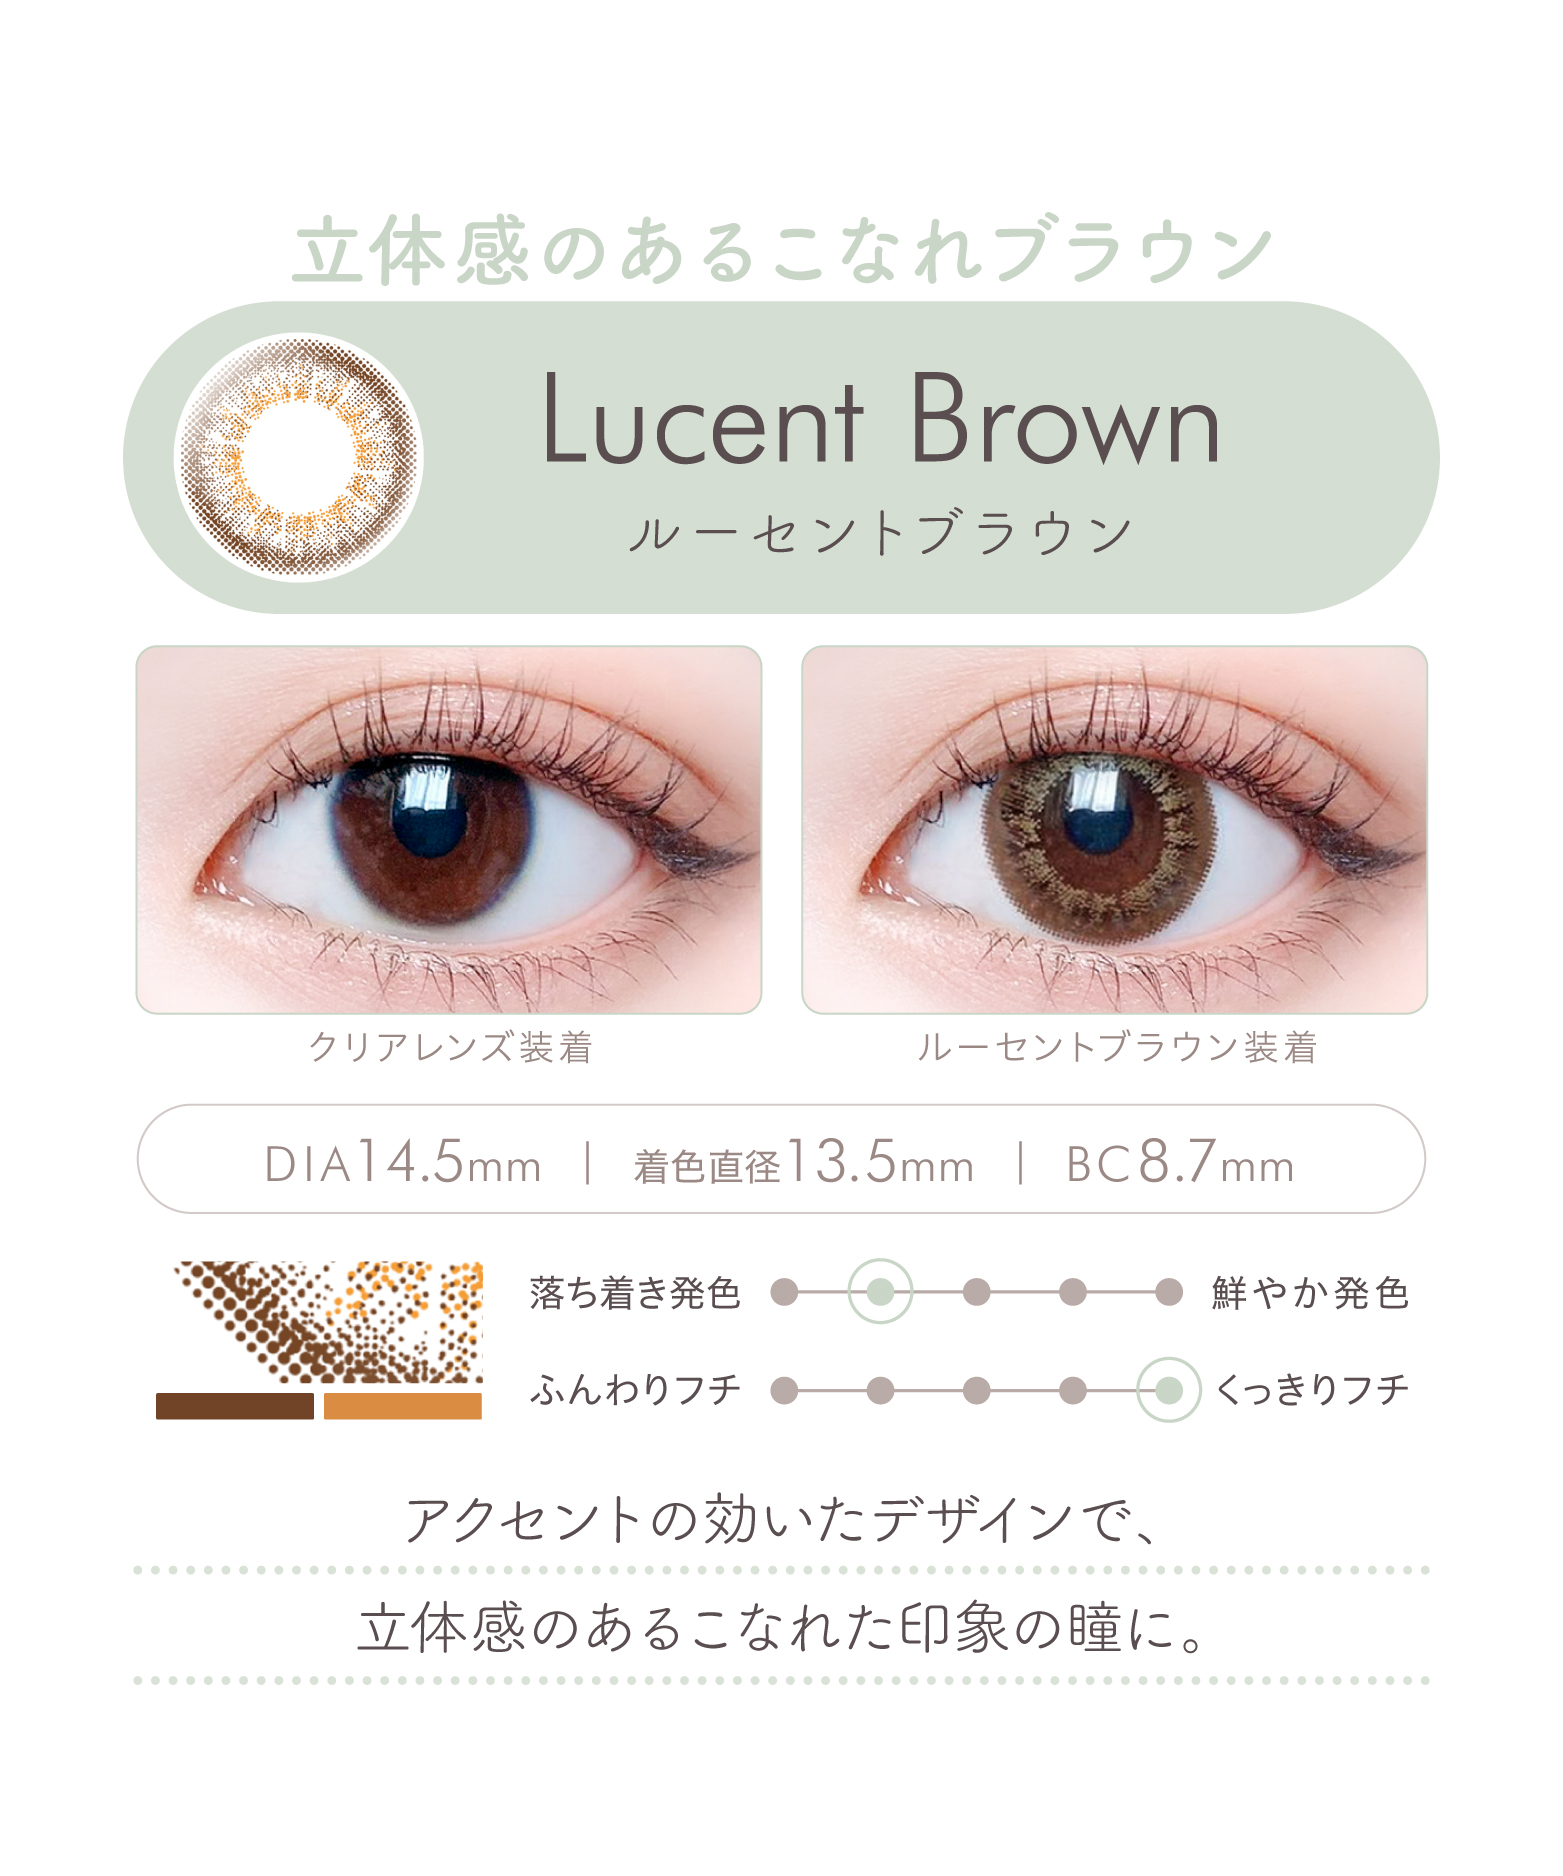 Lucent Brown